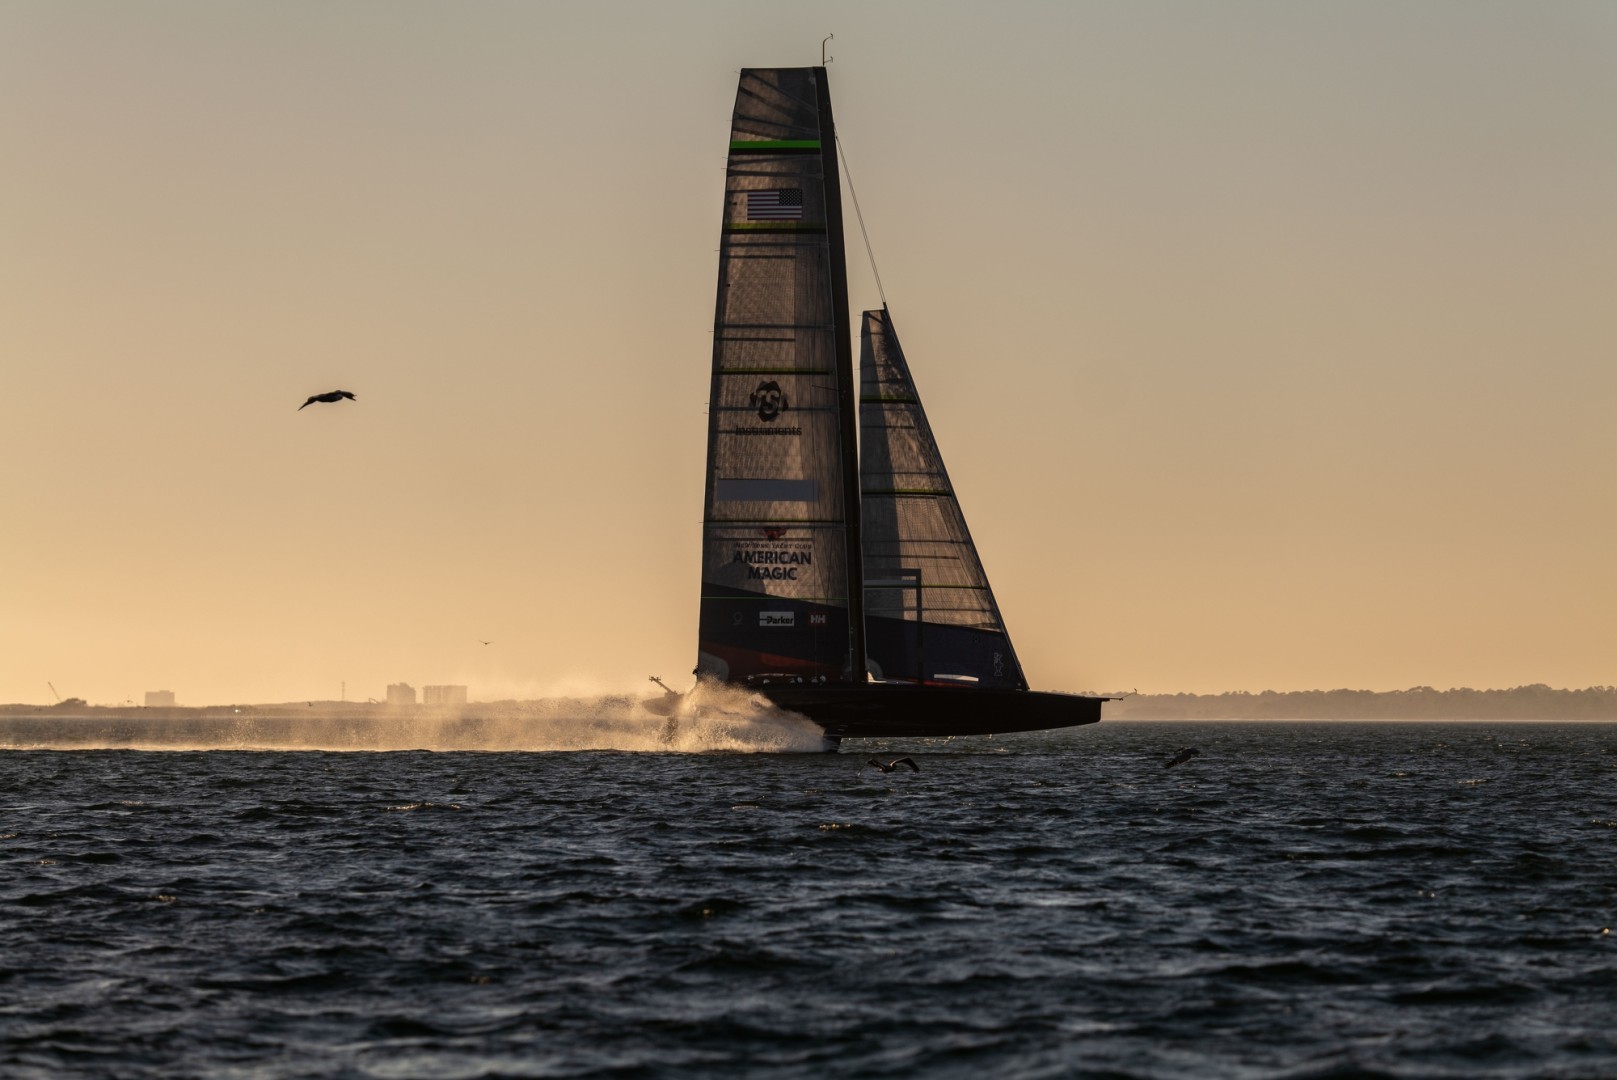 American Magic back out on the waters of Pensacola©Paul Todd / America’s Cup